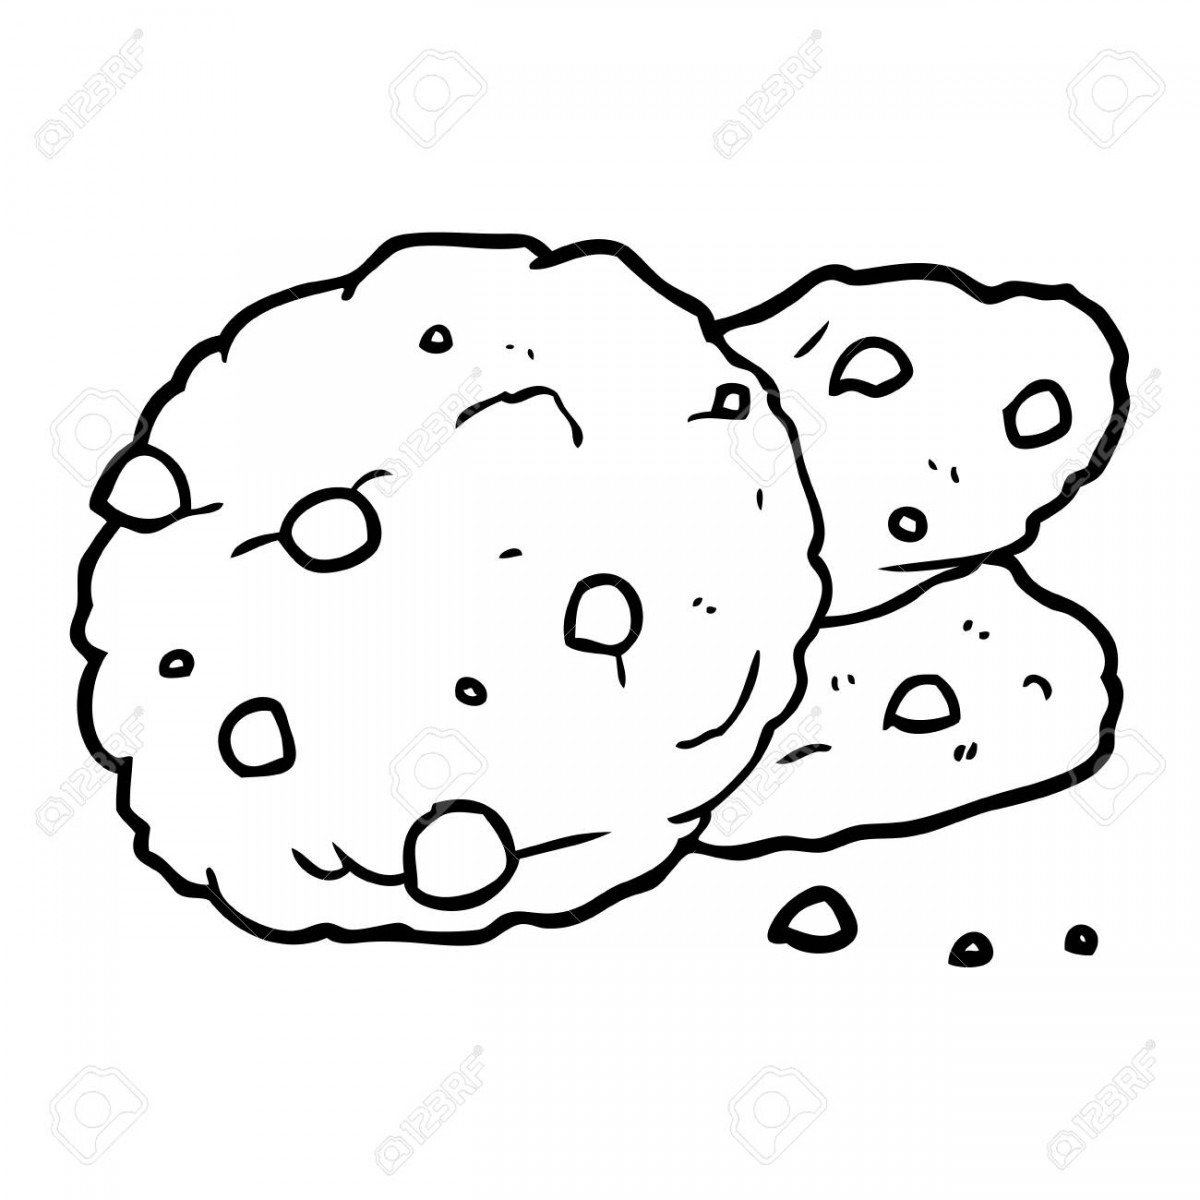 Line Drawing Of A Cookies Isolated On White Background Royalty